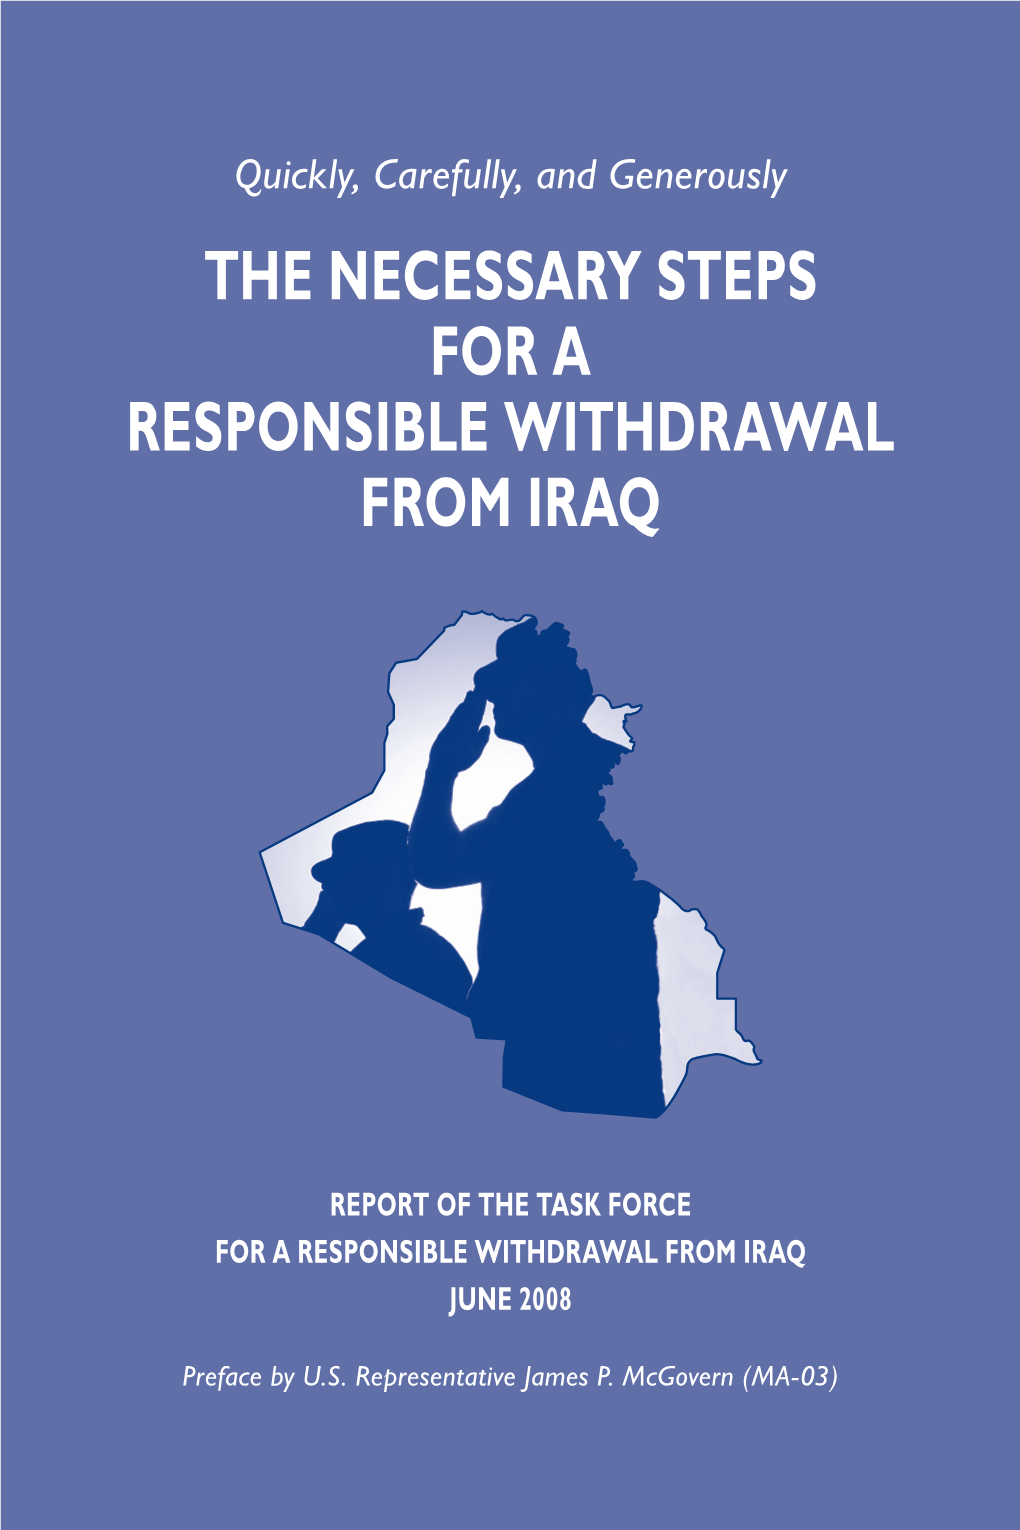 The Necessary Steps for Responsible Withdrawal from Iraq